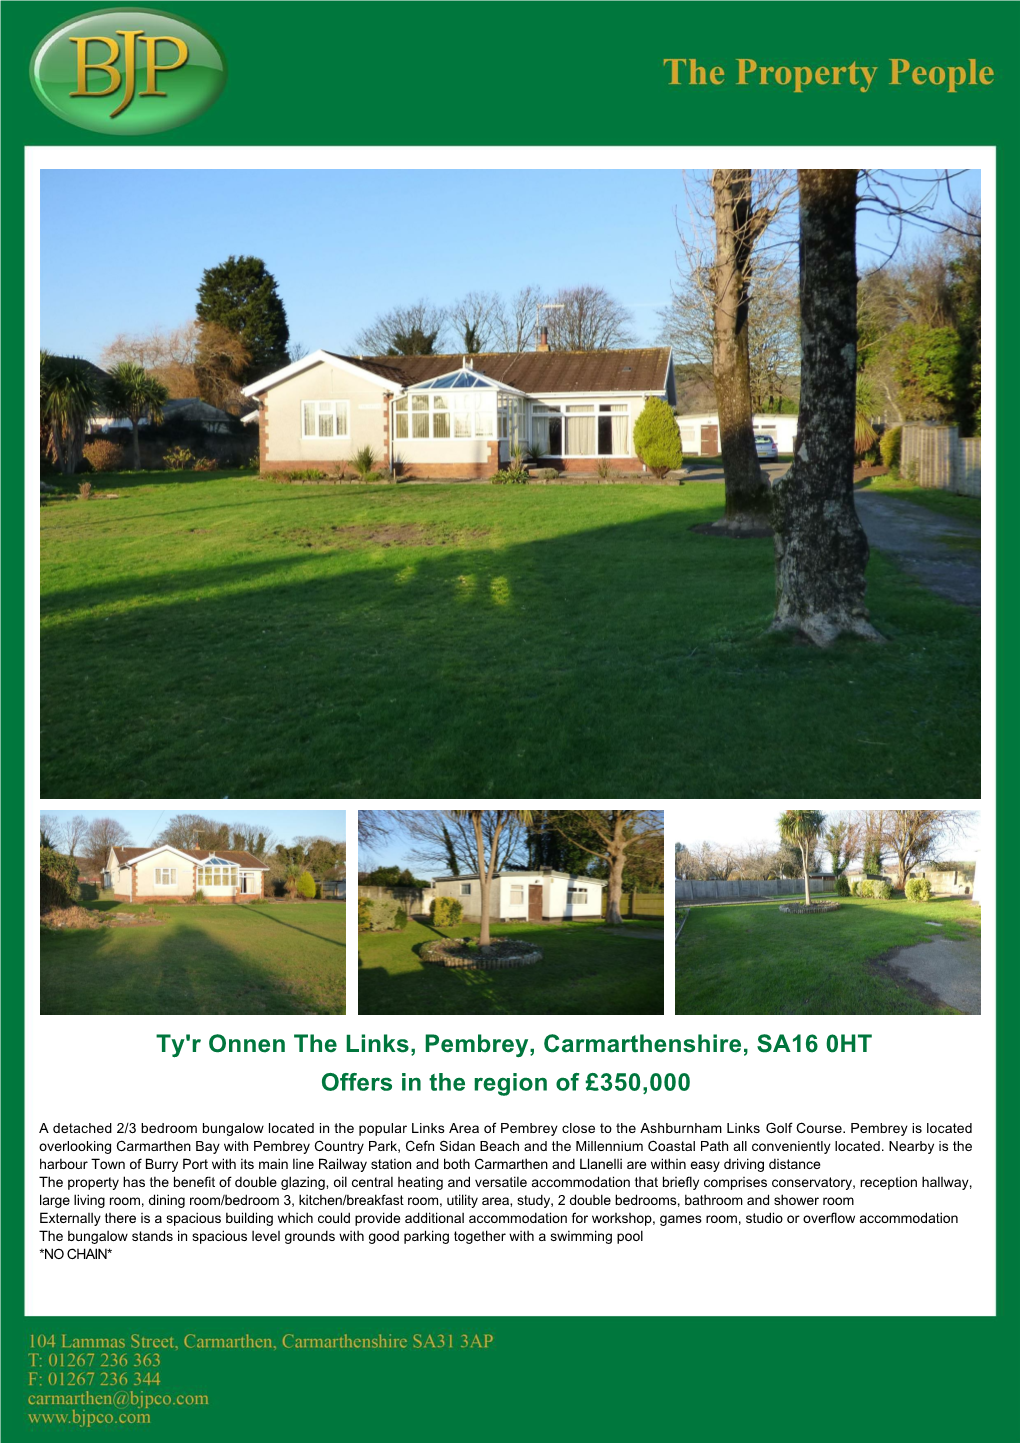 Offers in the Region of £350000 Ty'r Onnen the Links, Pembrey